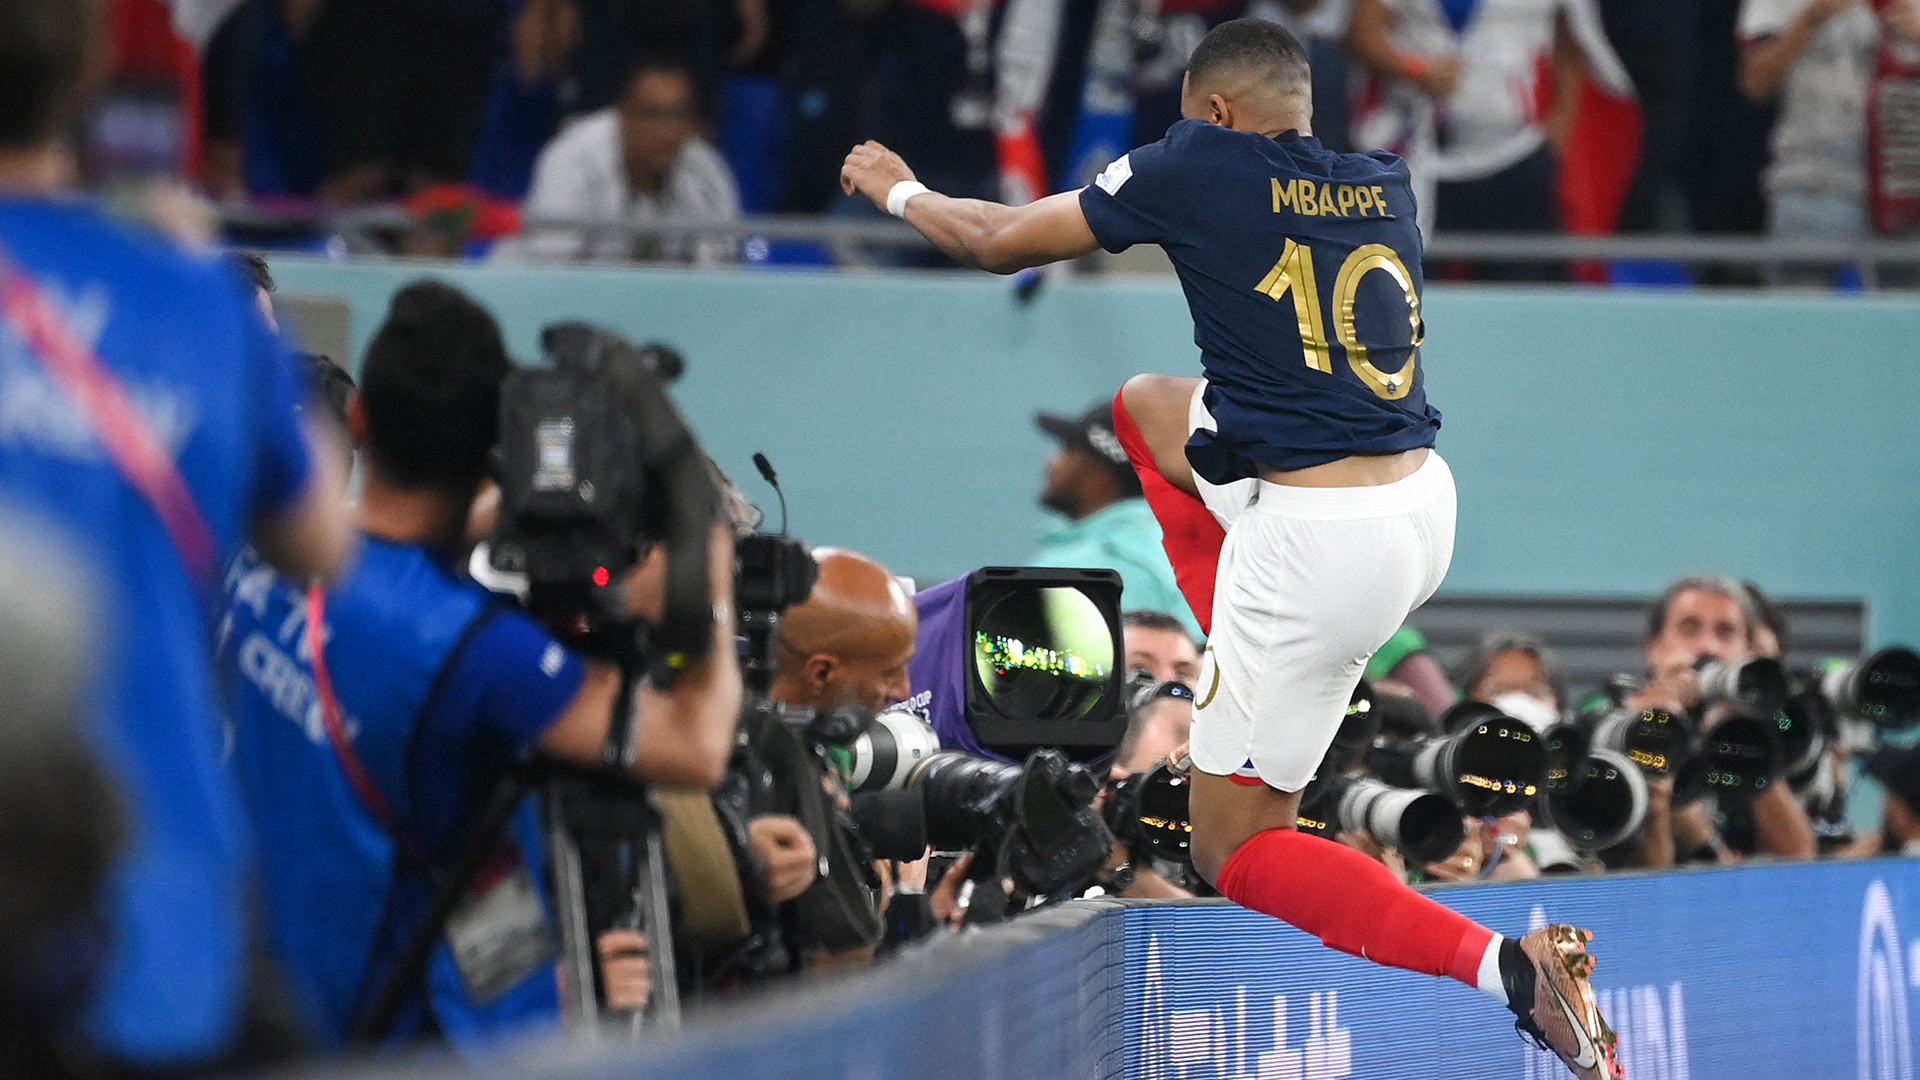 France's forward #10 Kylian Mbappe celebrates scoring his team's second goal during the Qatar 2022 World Cup Group D football match between France and Denmark at Stadium 974 in Doha on November 26, 2022.